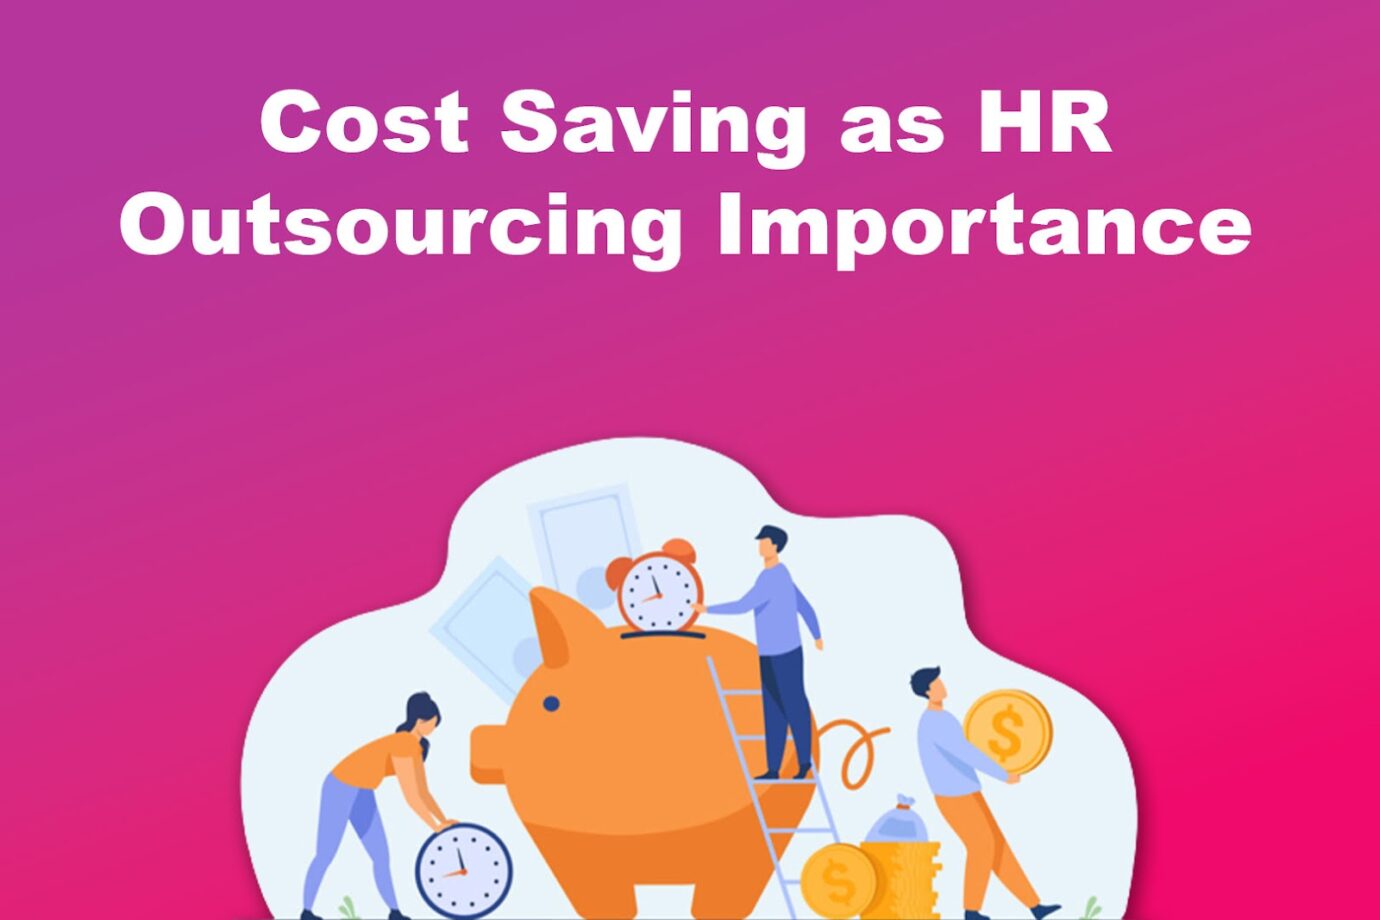 Cost Saving as HR Outsourcing Importance